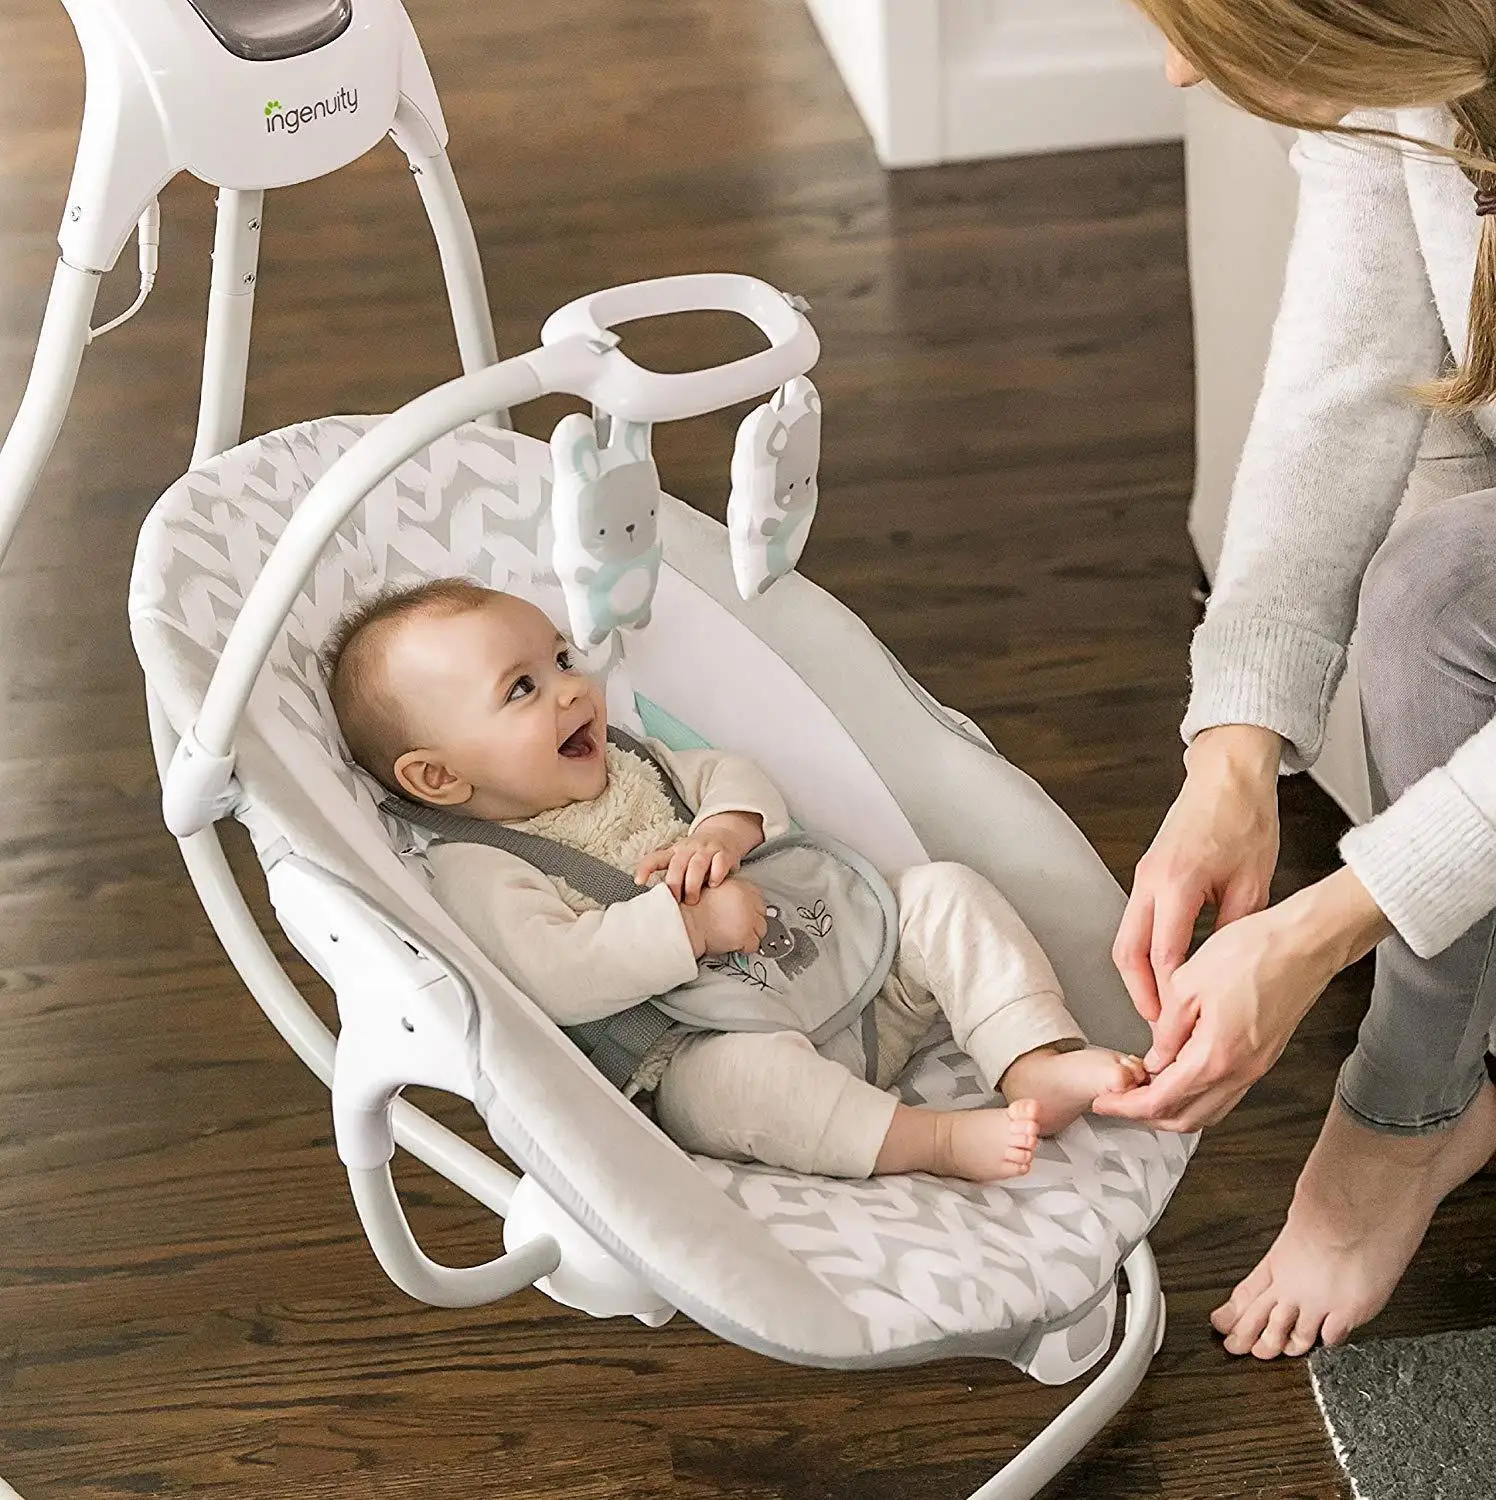 LazyChild Baby Rocking Chair Detachable Multi-Functional Comfort Cradle Baby Coaxing Sleep Rocking Chair Electric Swing Chair